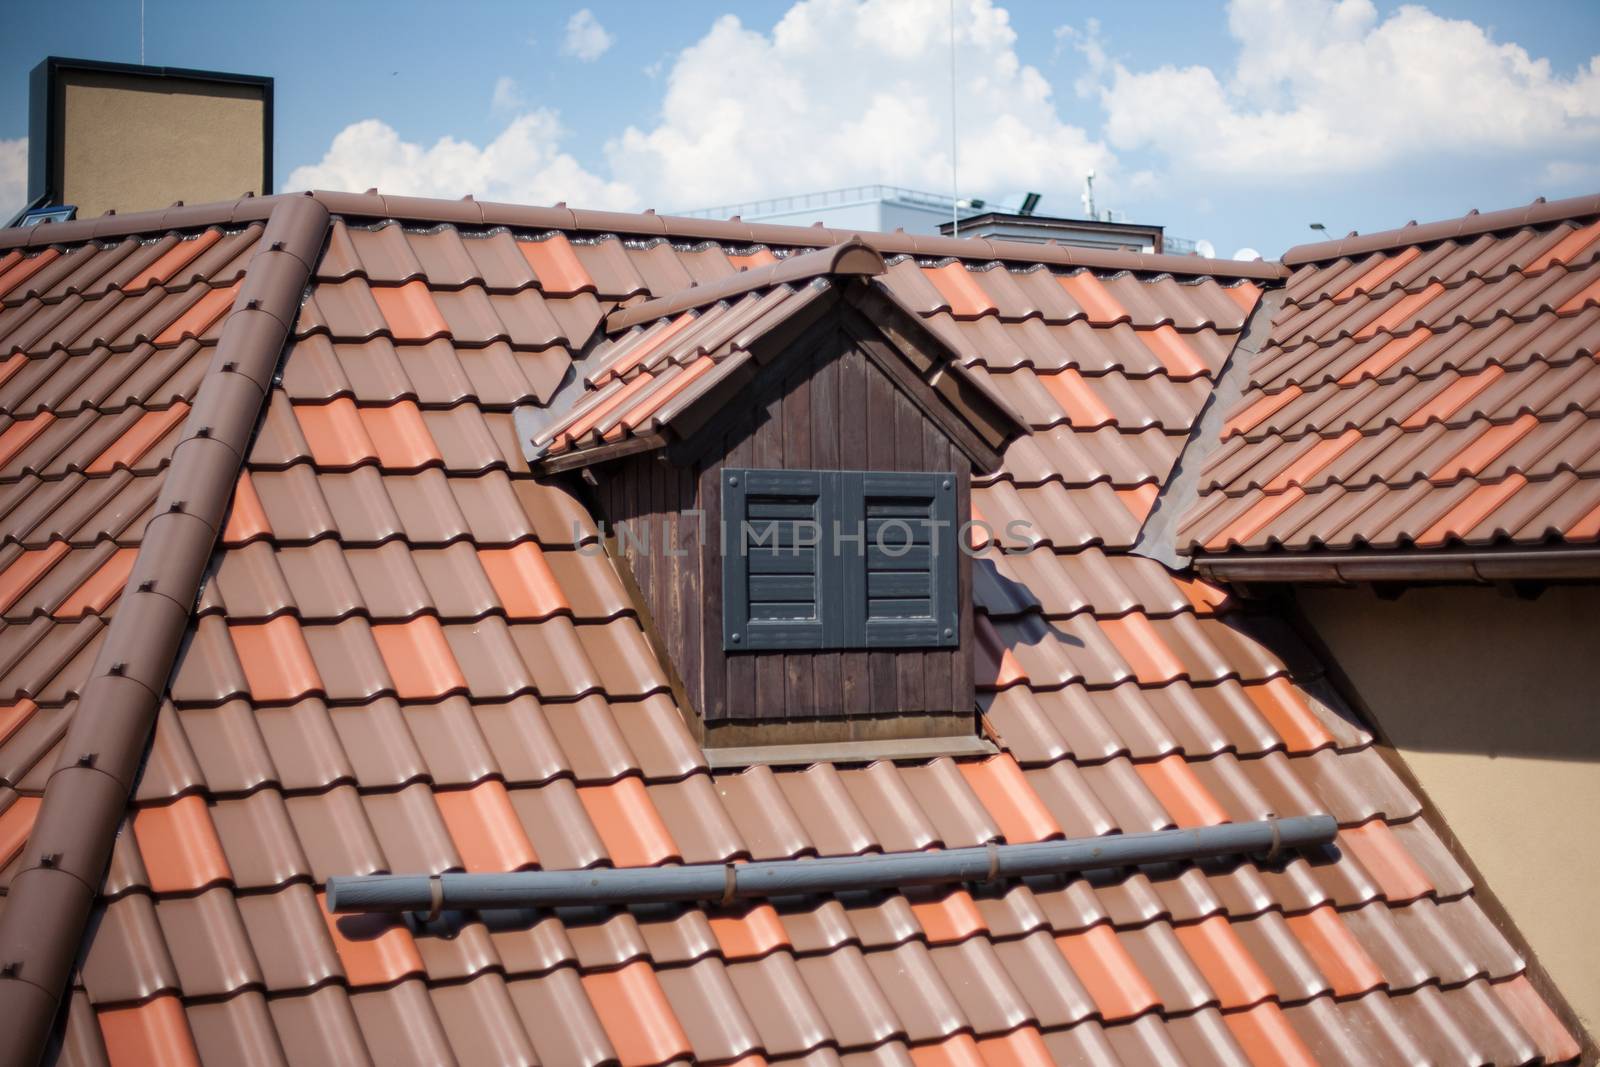 Detail of overlapping roofing tiles on a new build with window